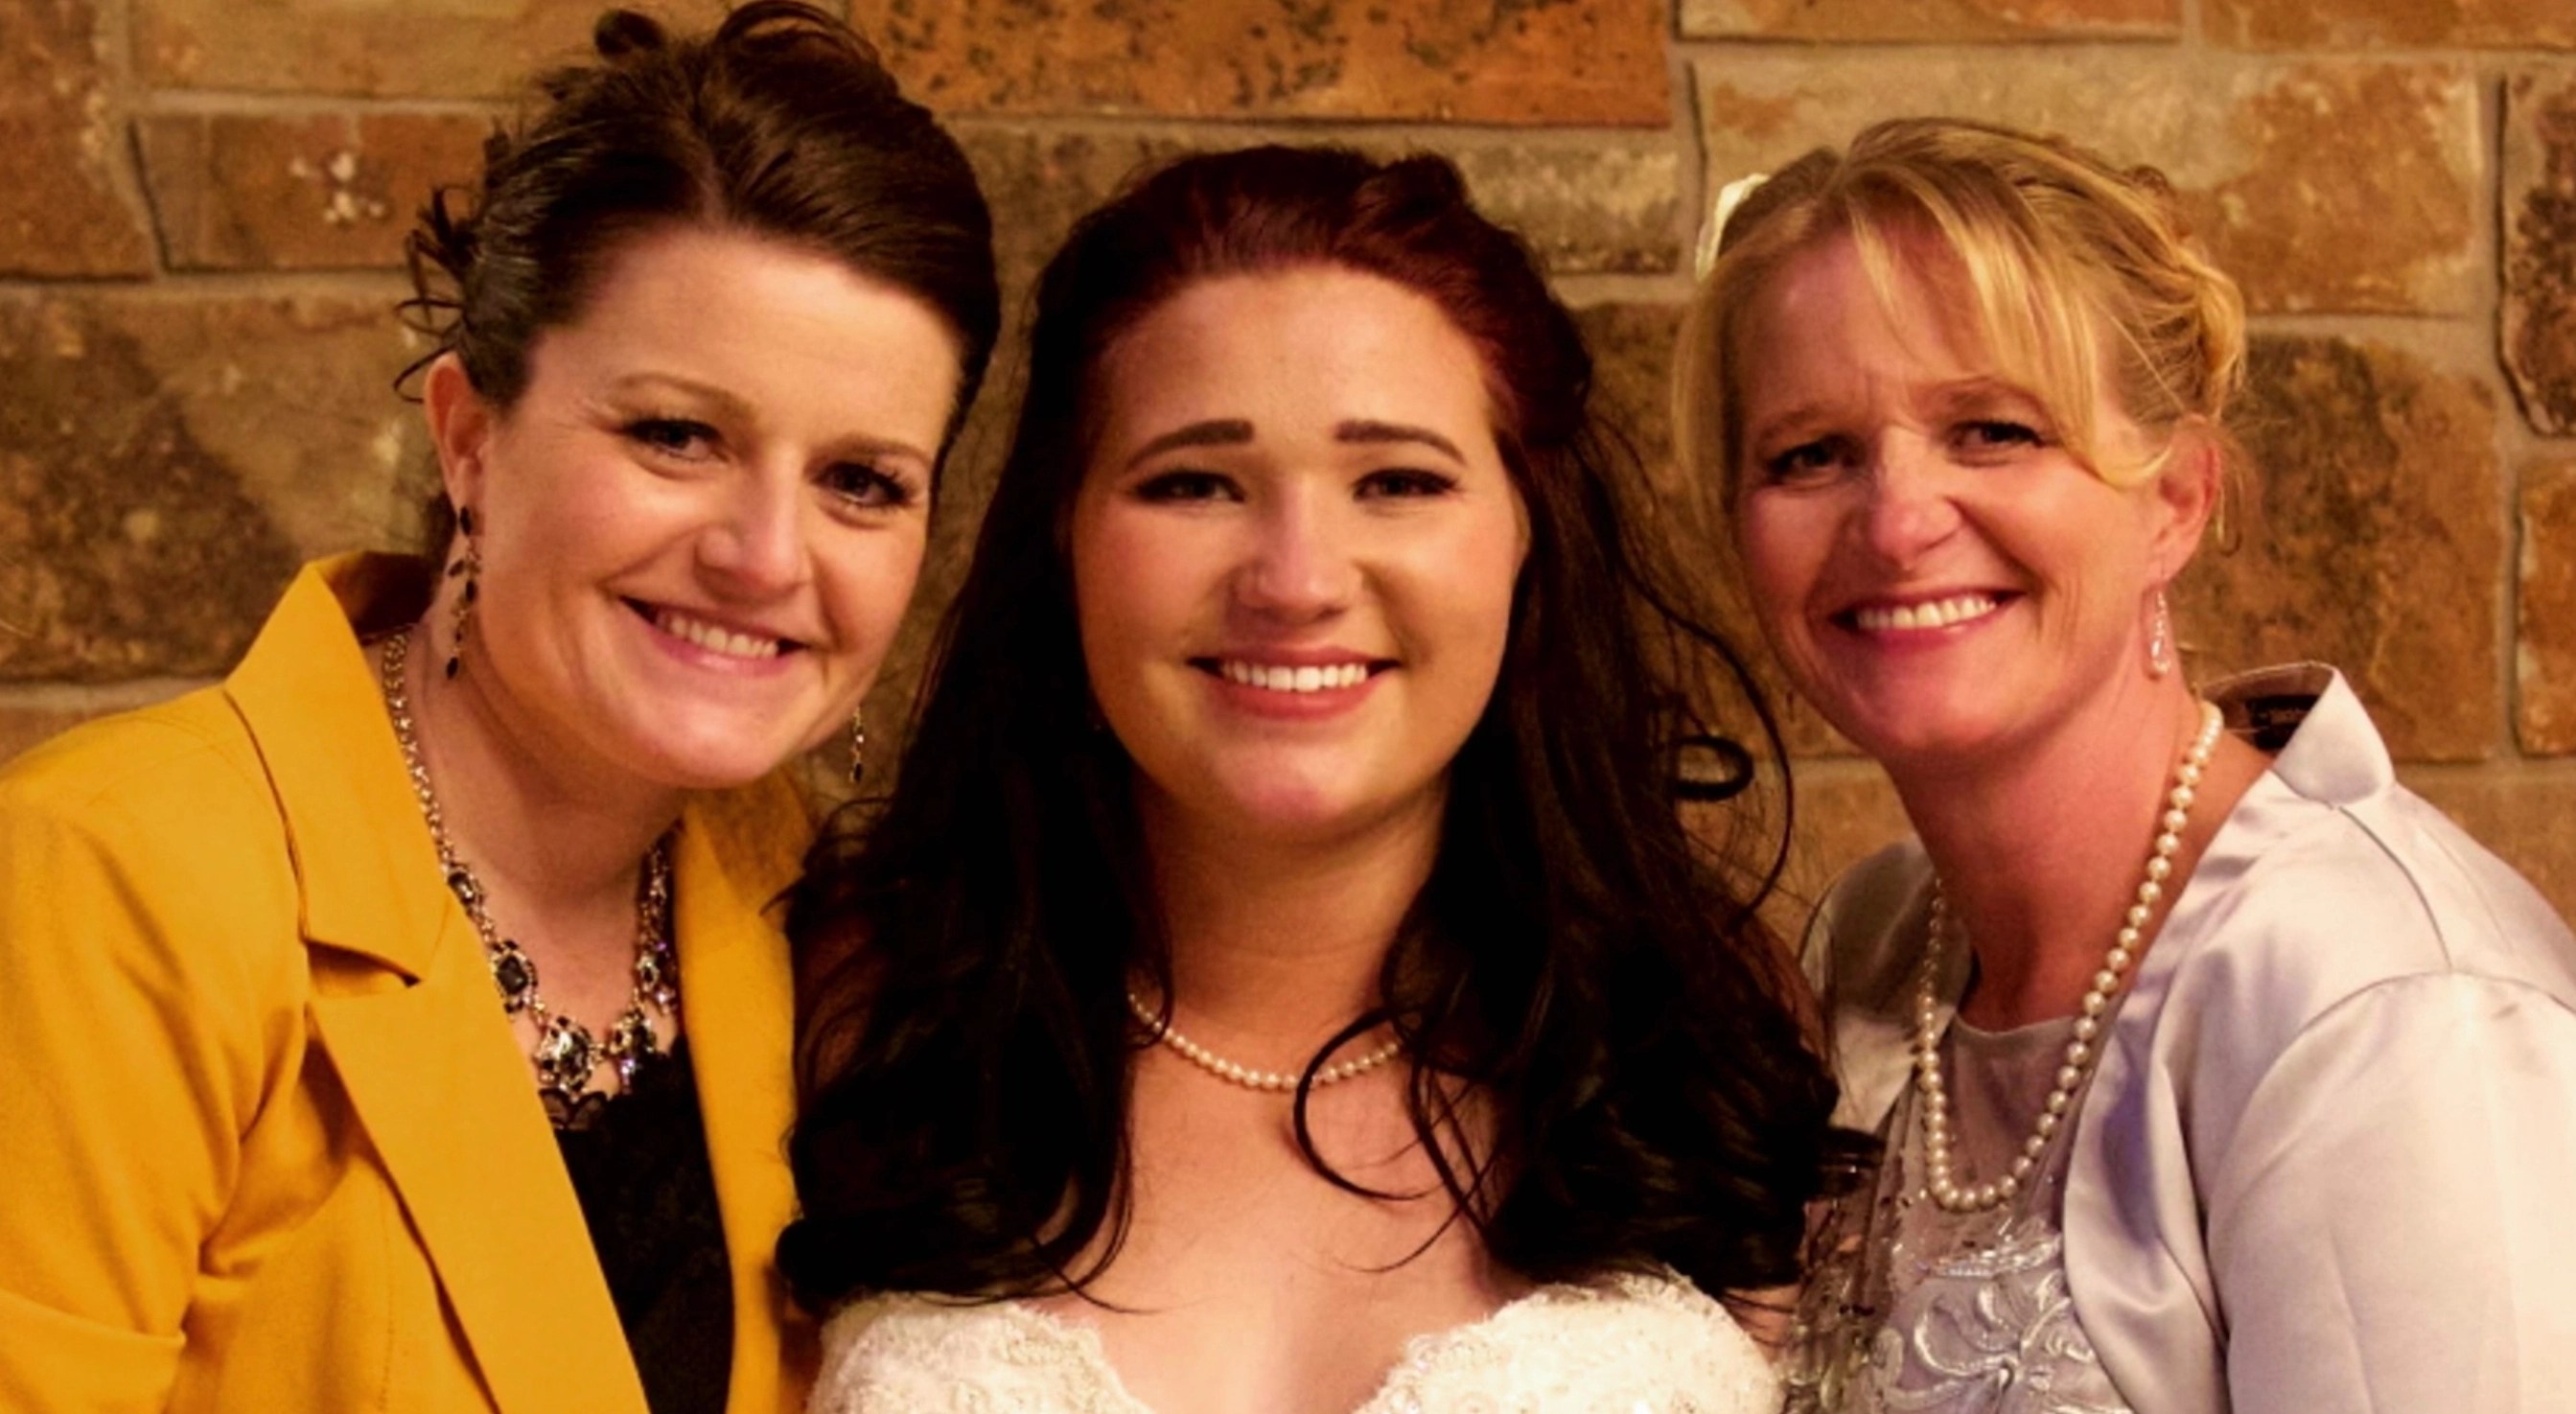 Robyn Brown standing with Mykelti Brown on her wedding day with Christine Brown on 'Sister Wives' on TLC.